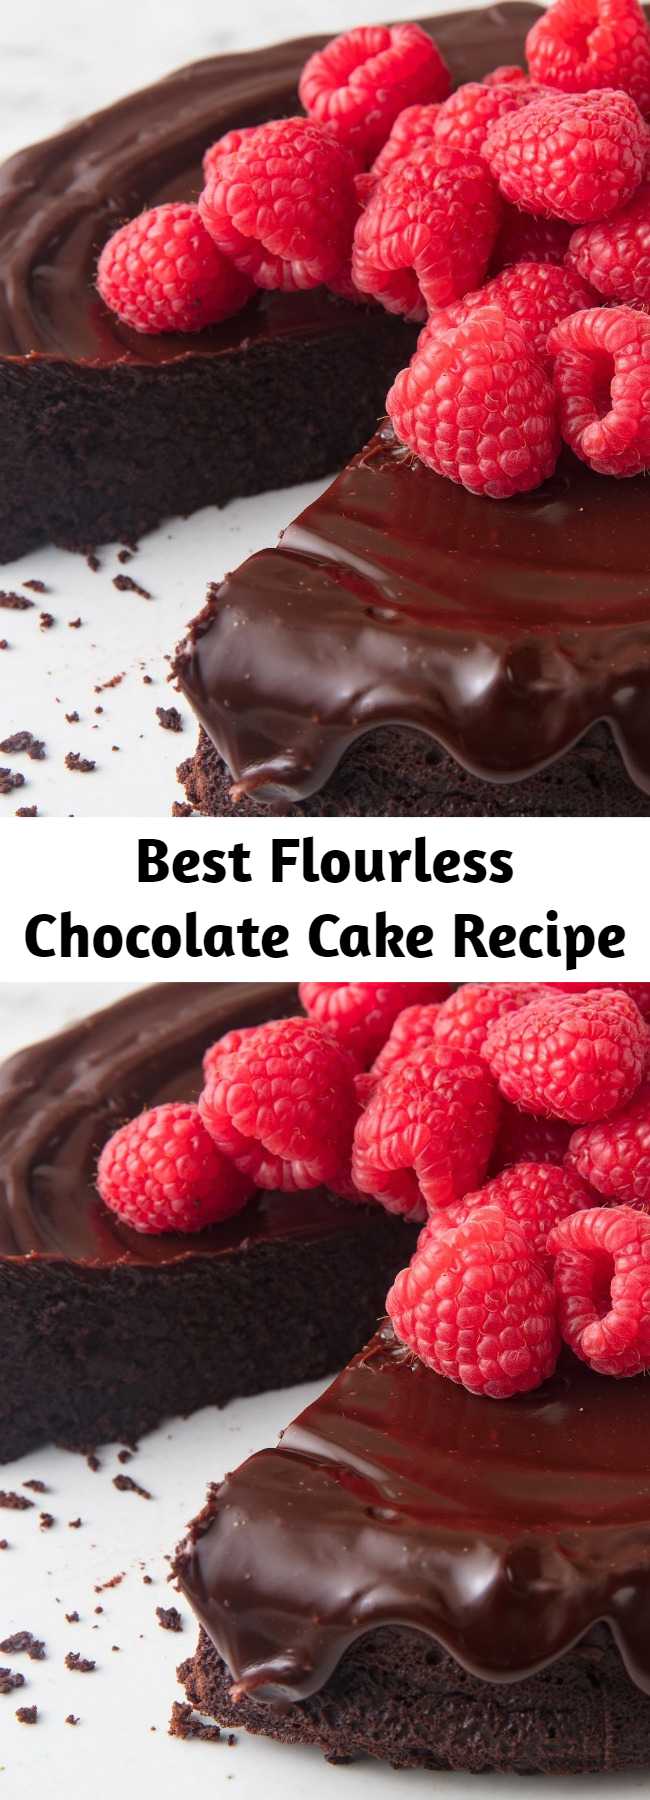 Best Flourless Chocolate Cake Recipe - The best part about this flourless chocolate cake is that it doesn't require any flour alternatives. It's just the perfect cake that happens to have zero flour. Here's our easy recipe to make at home!